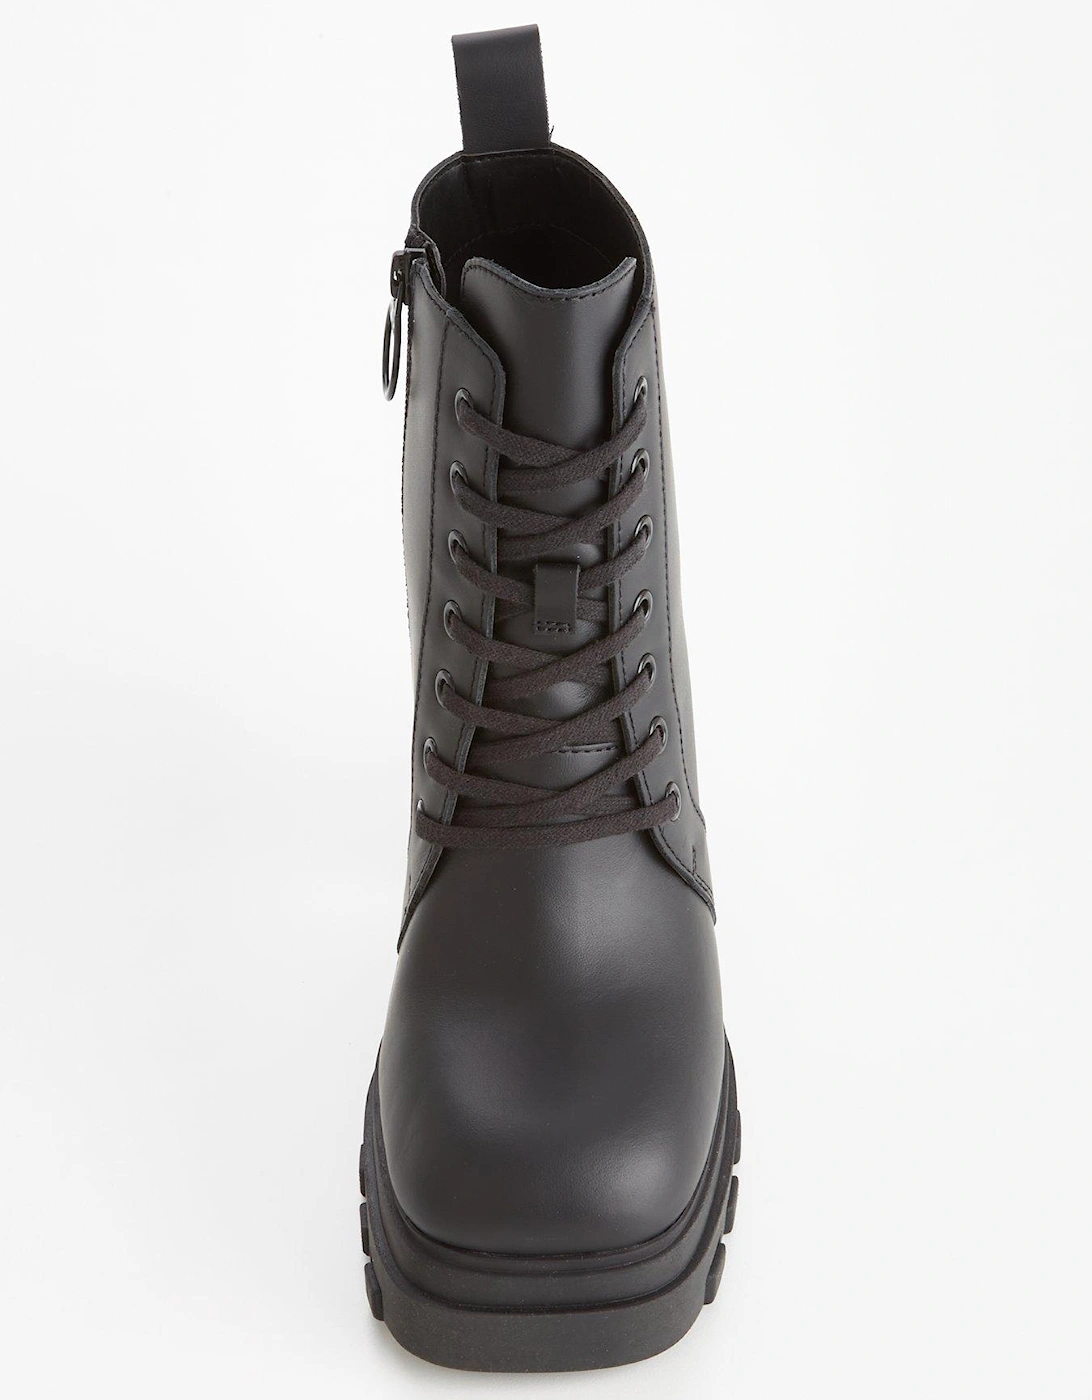 Leather Lace Up Heel Boot - Black